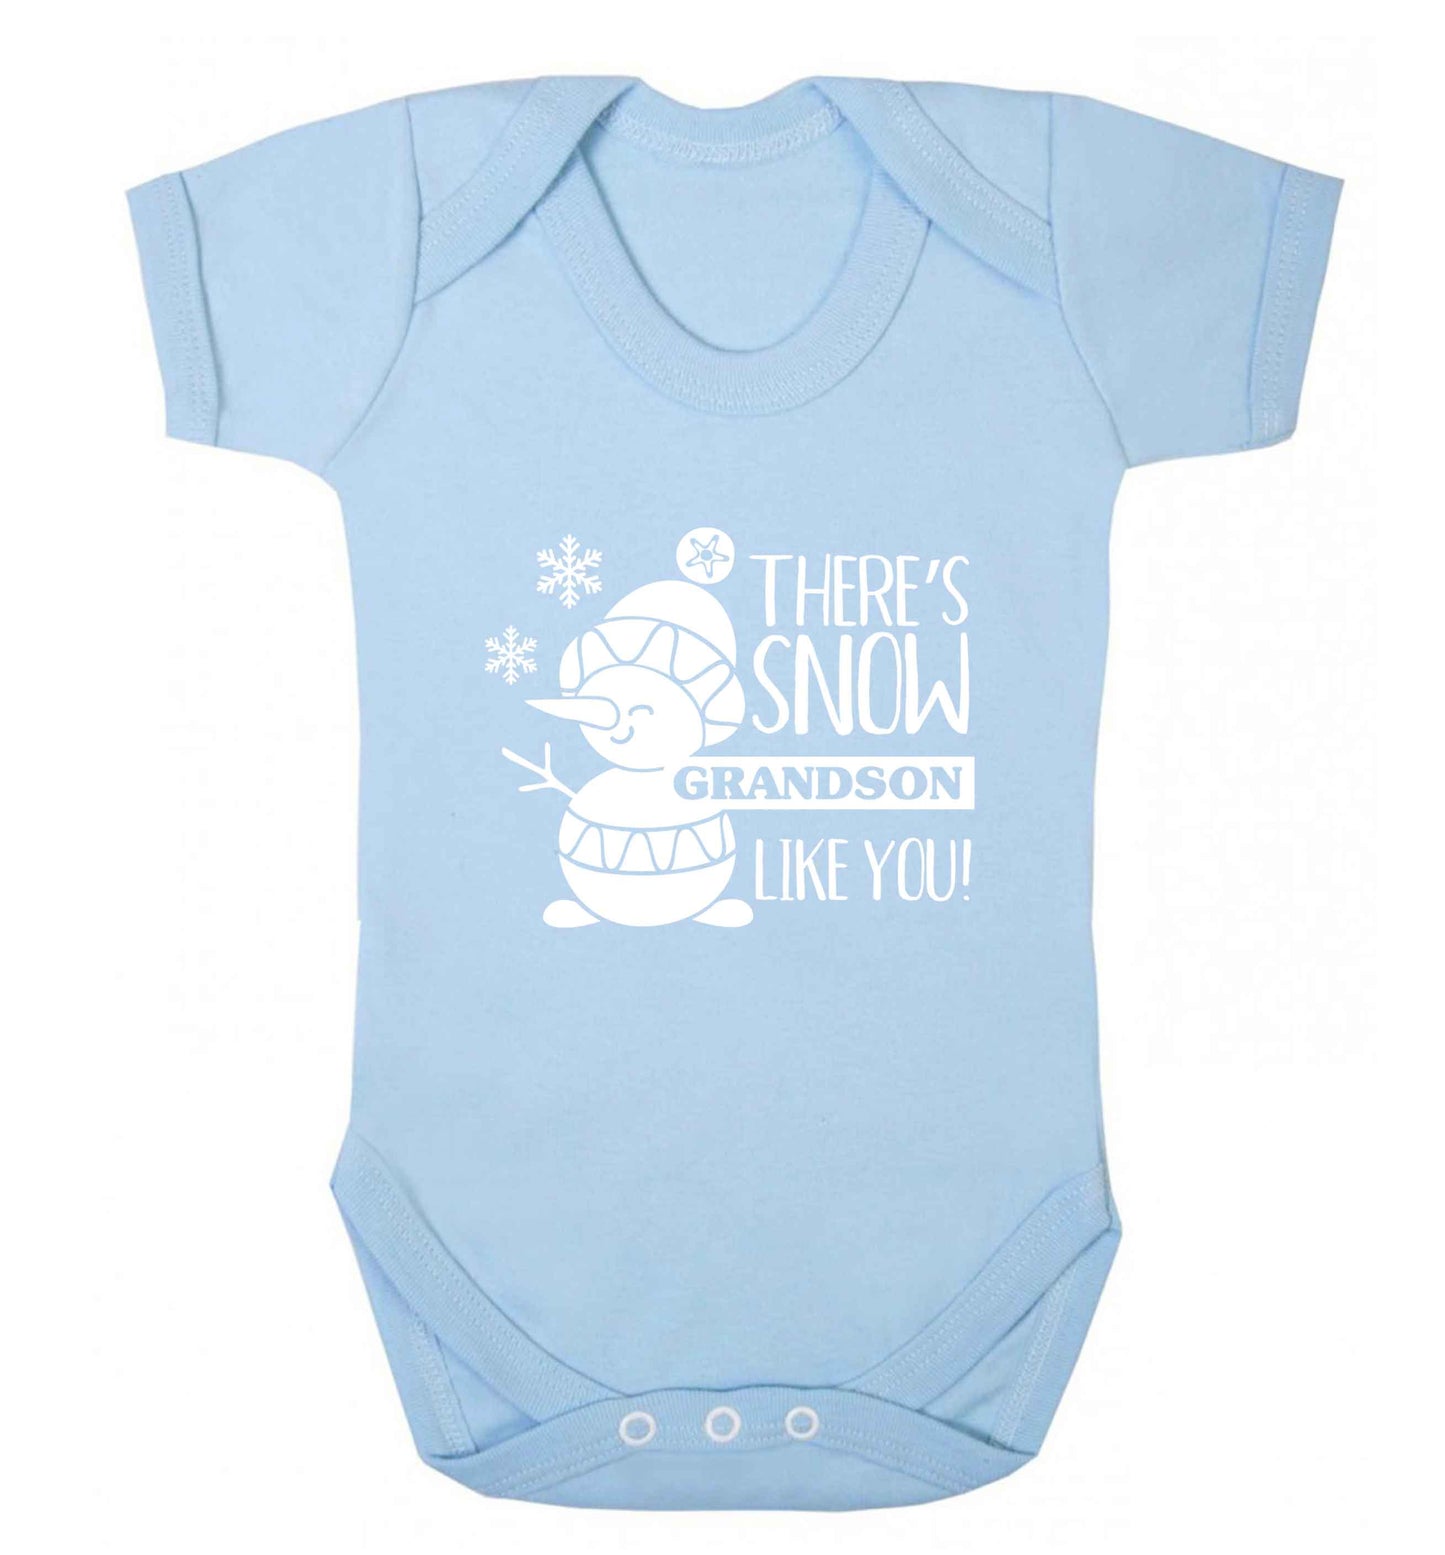 There's snow grandson like you baby vest pale blue 18-24 months